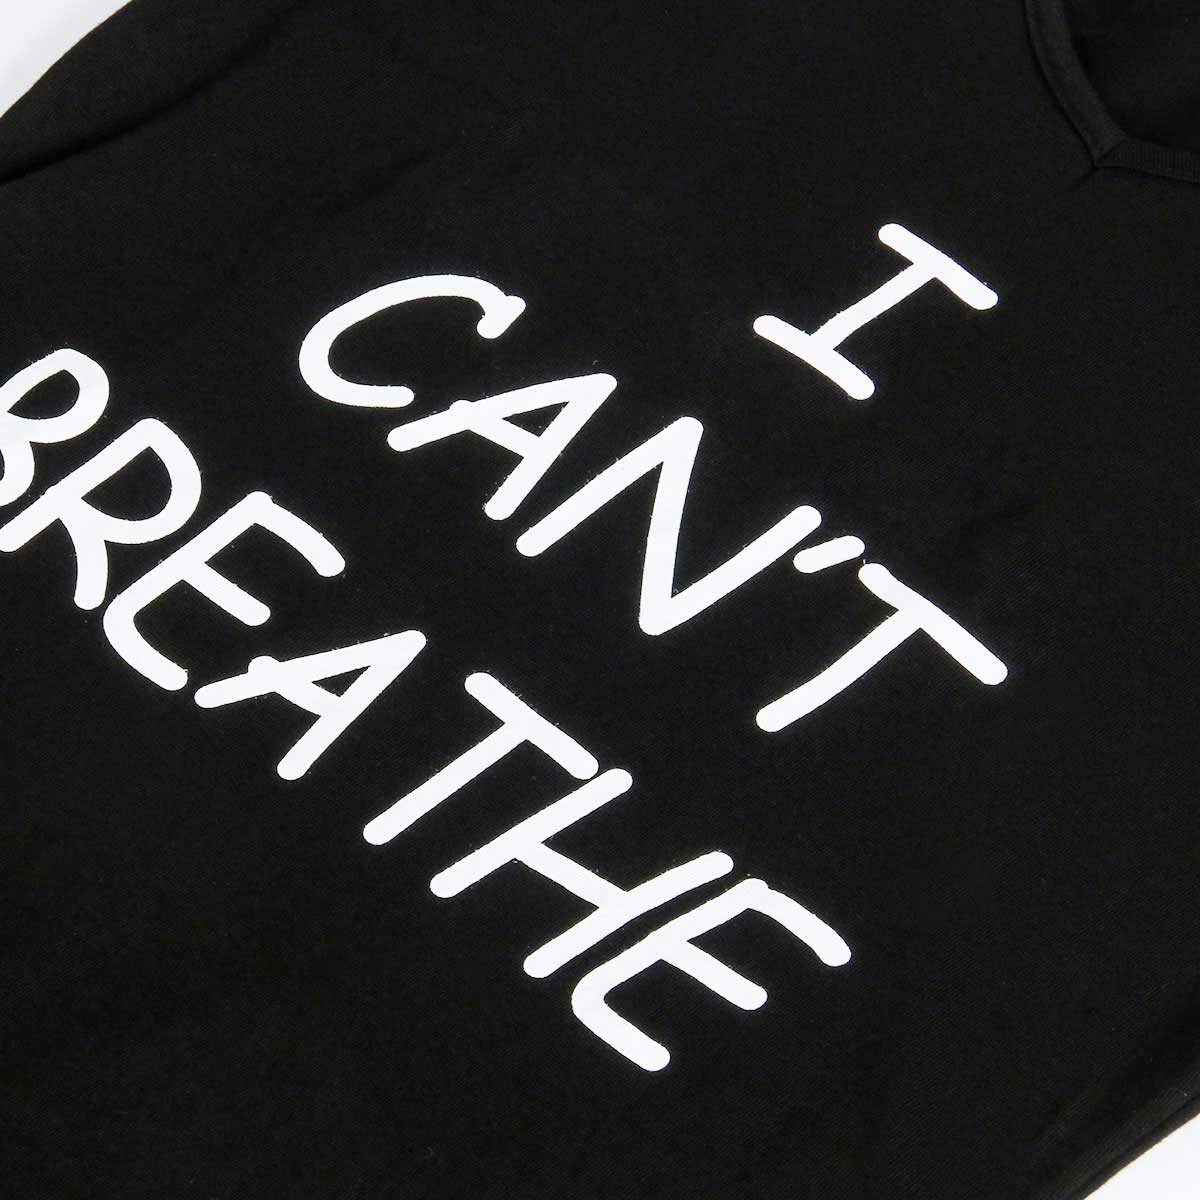 I Can't Breathe T-Shirt Women's Black Protest Tee 